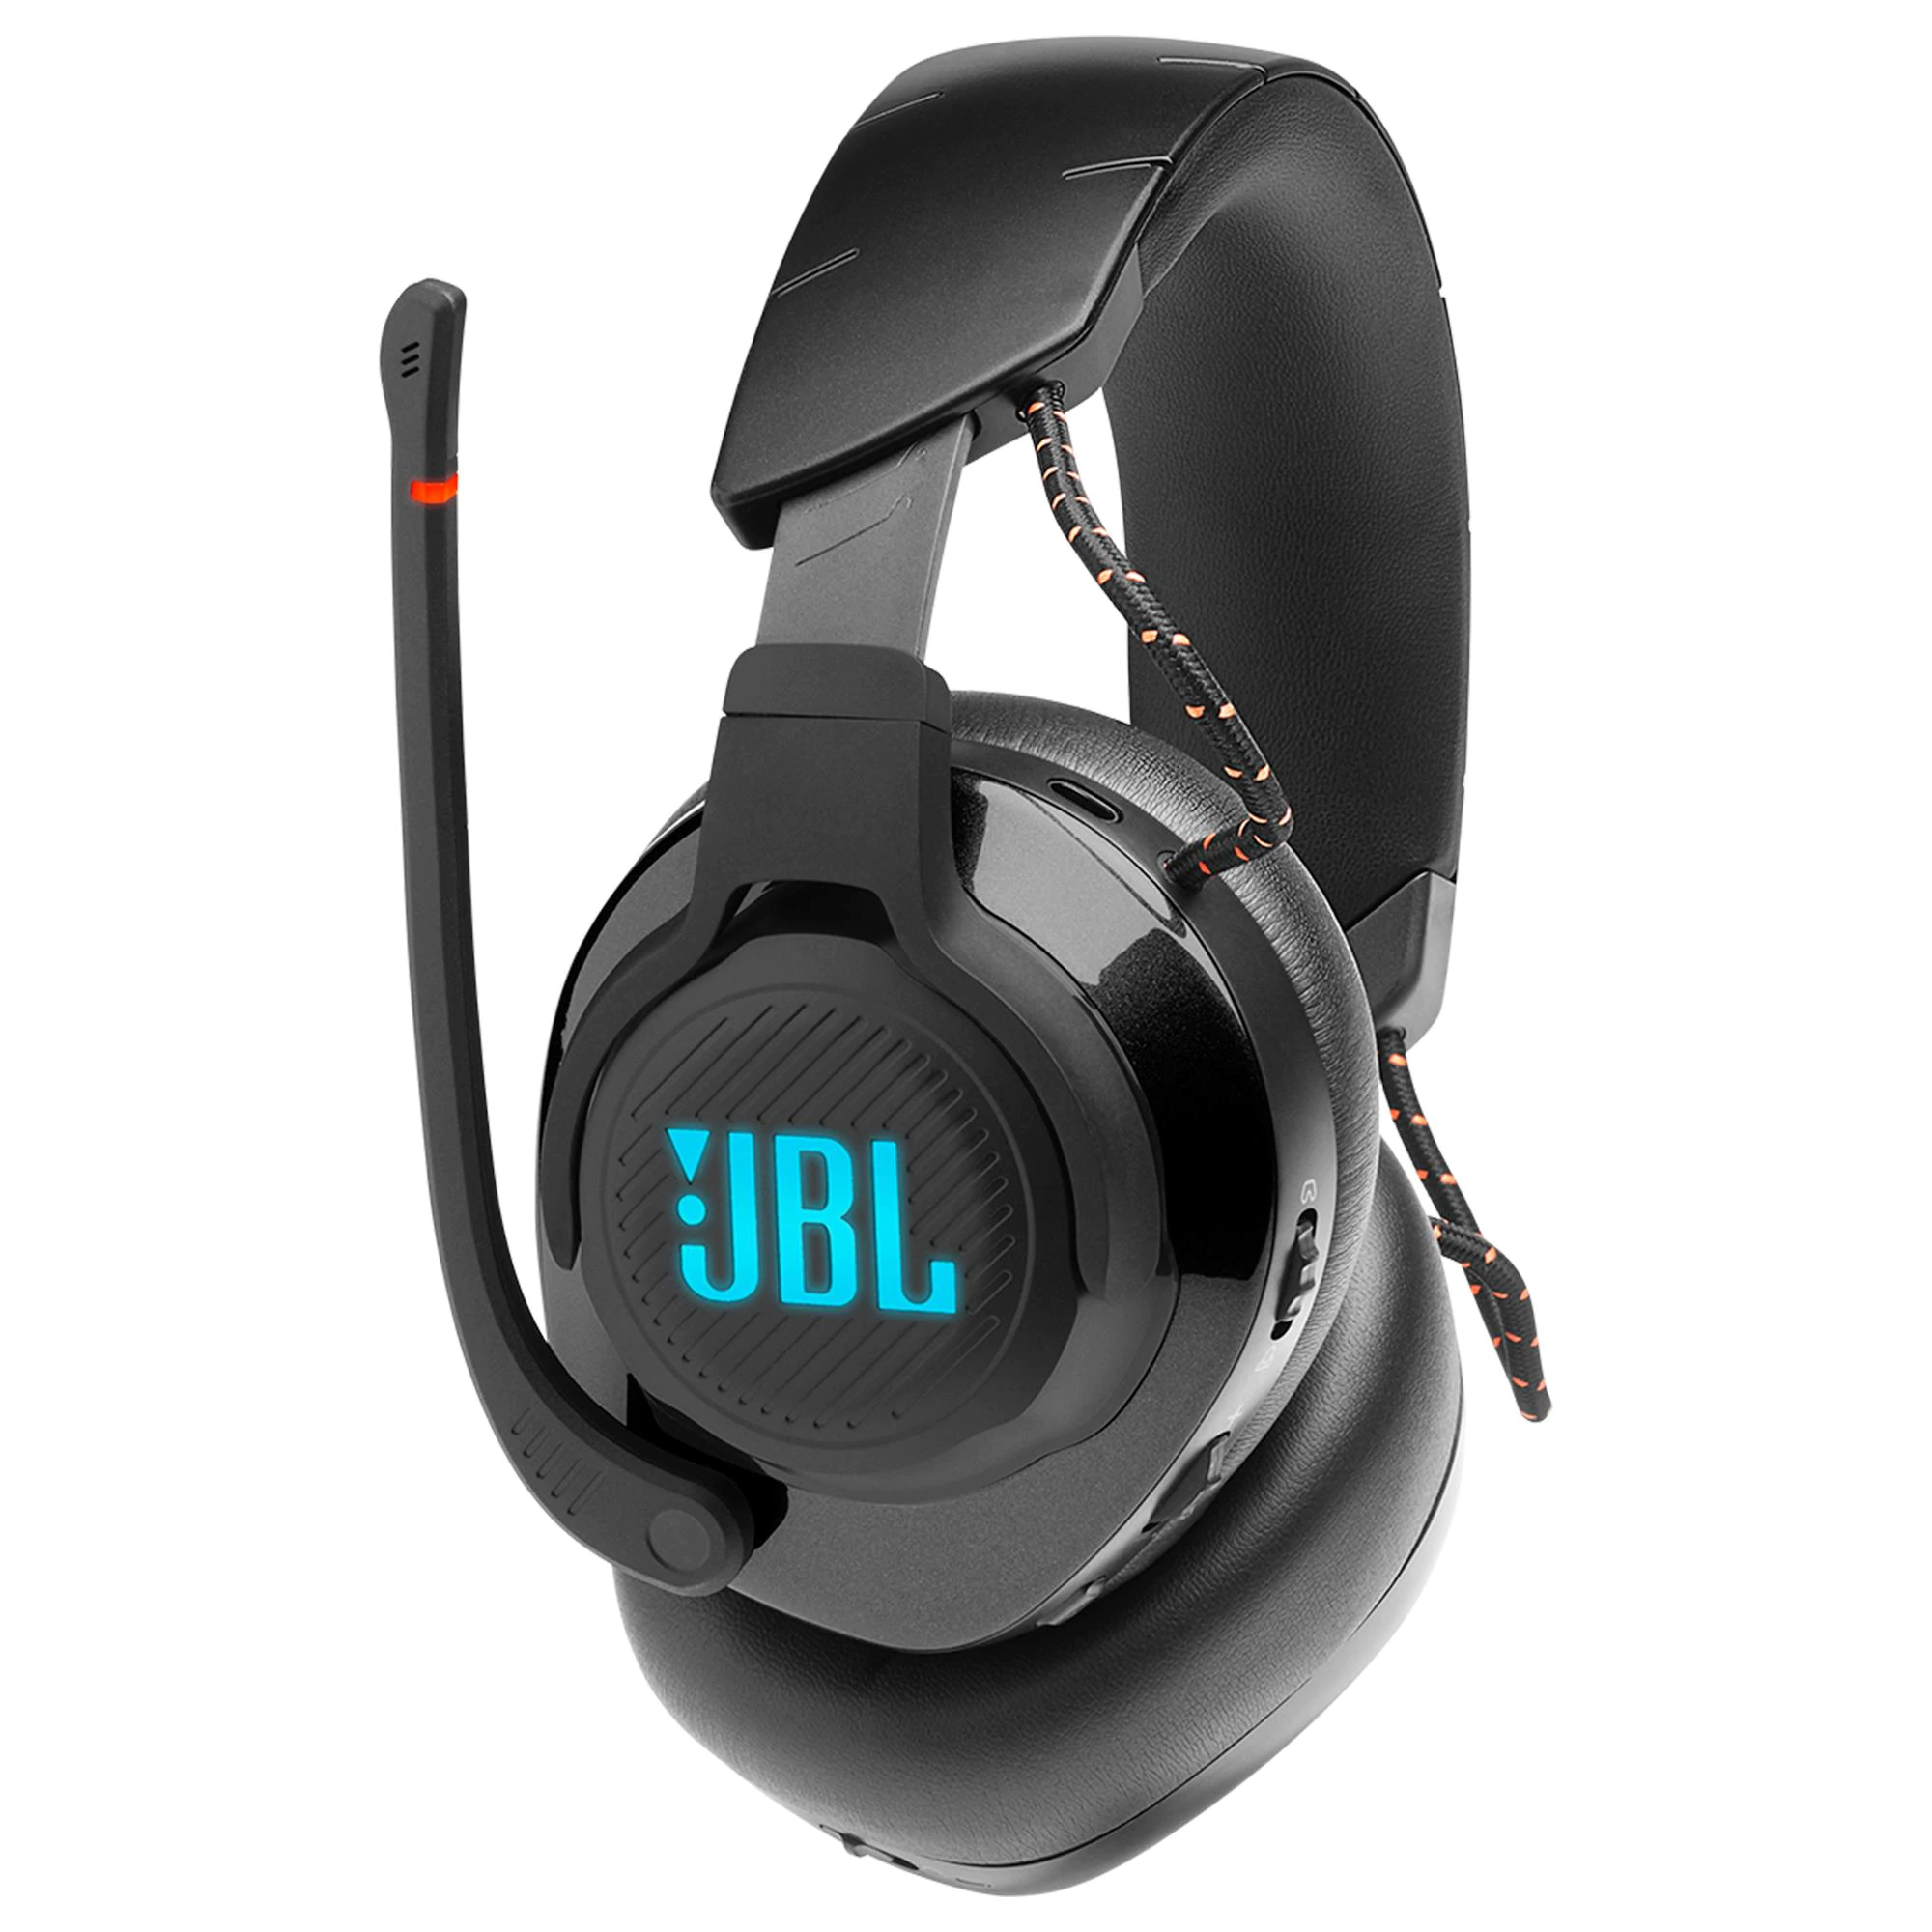 JBL - Quantum 600 RGB Wireless DTS Headphone:X v2.0 Gaming Headset for PC, PS4, Xbox One, Nintendo Switch and Mobile Devices - Black